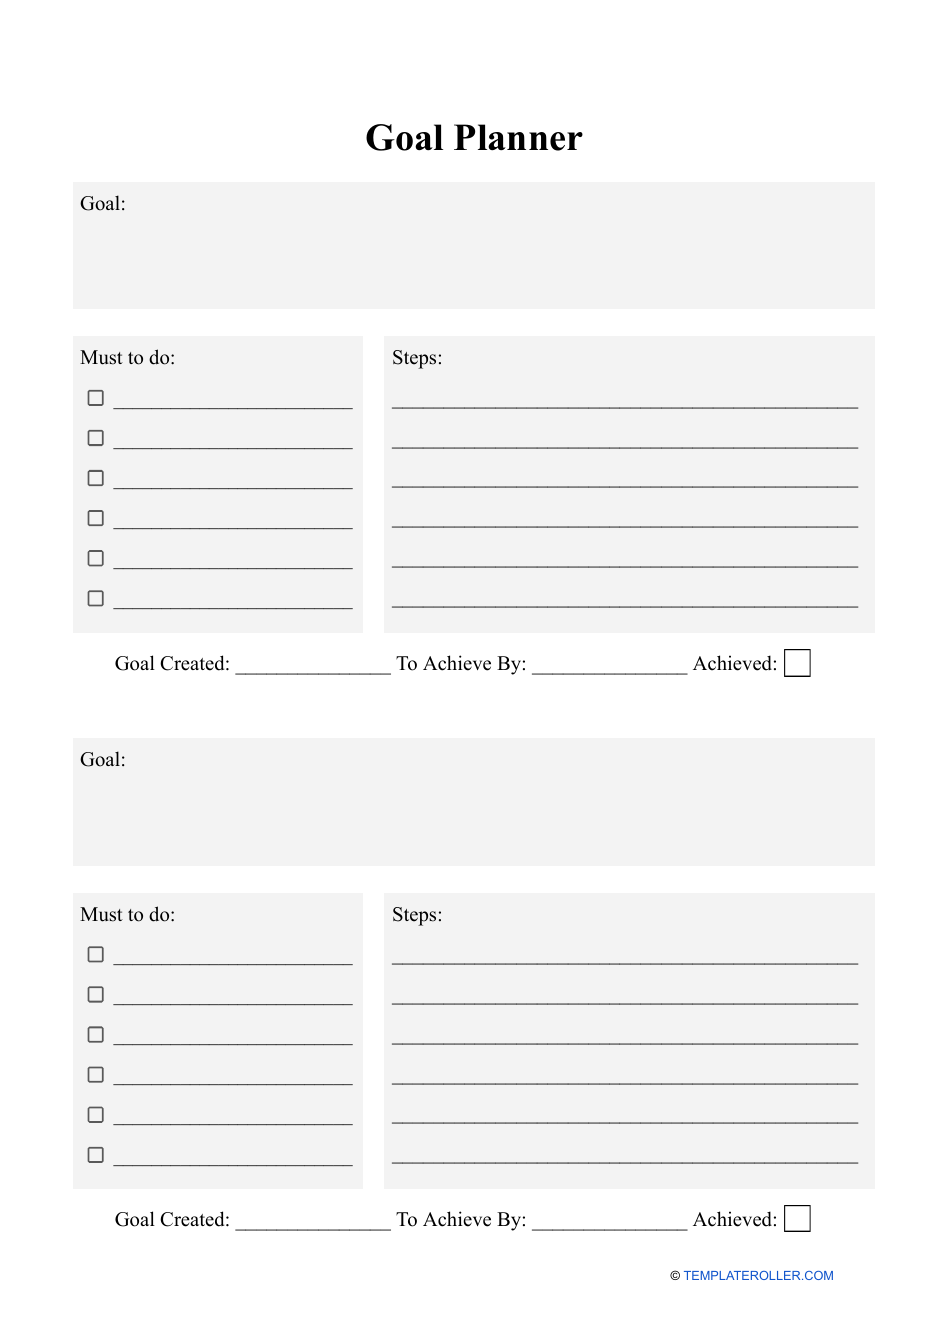 A preview image of the Goal Planner Template - Black document.